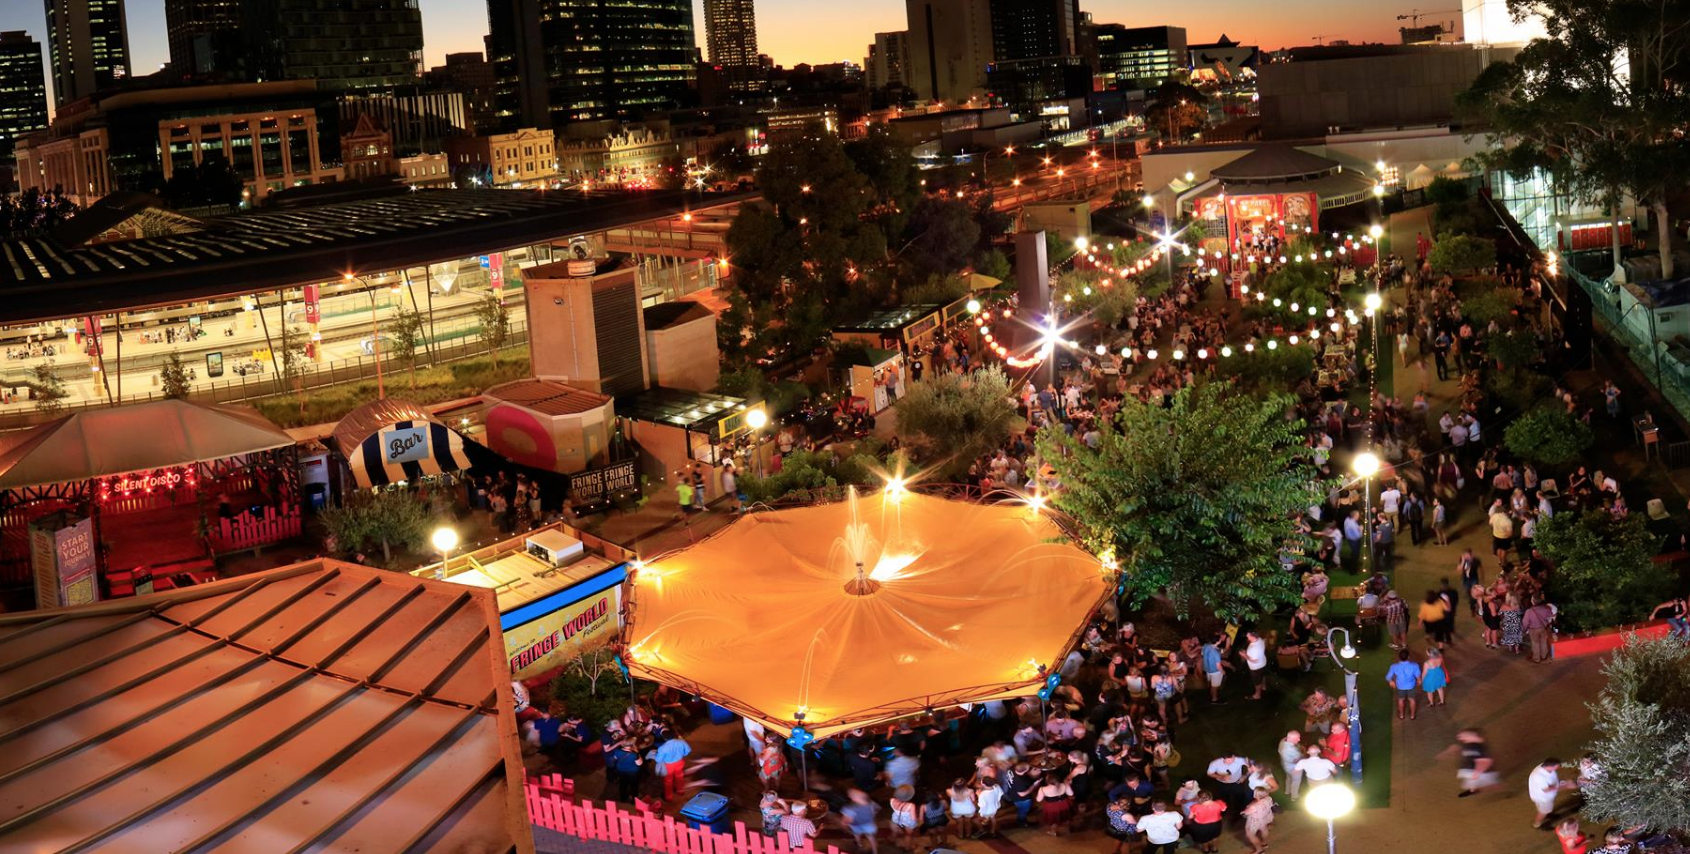 Perth Fringe World to expand after economic impact hits $101m